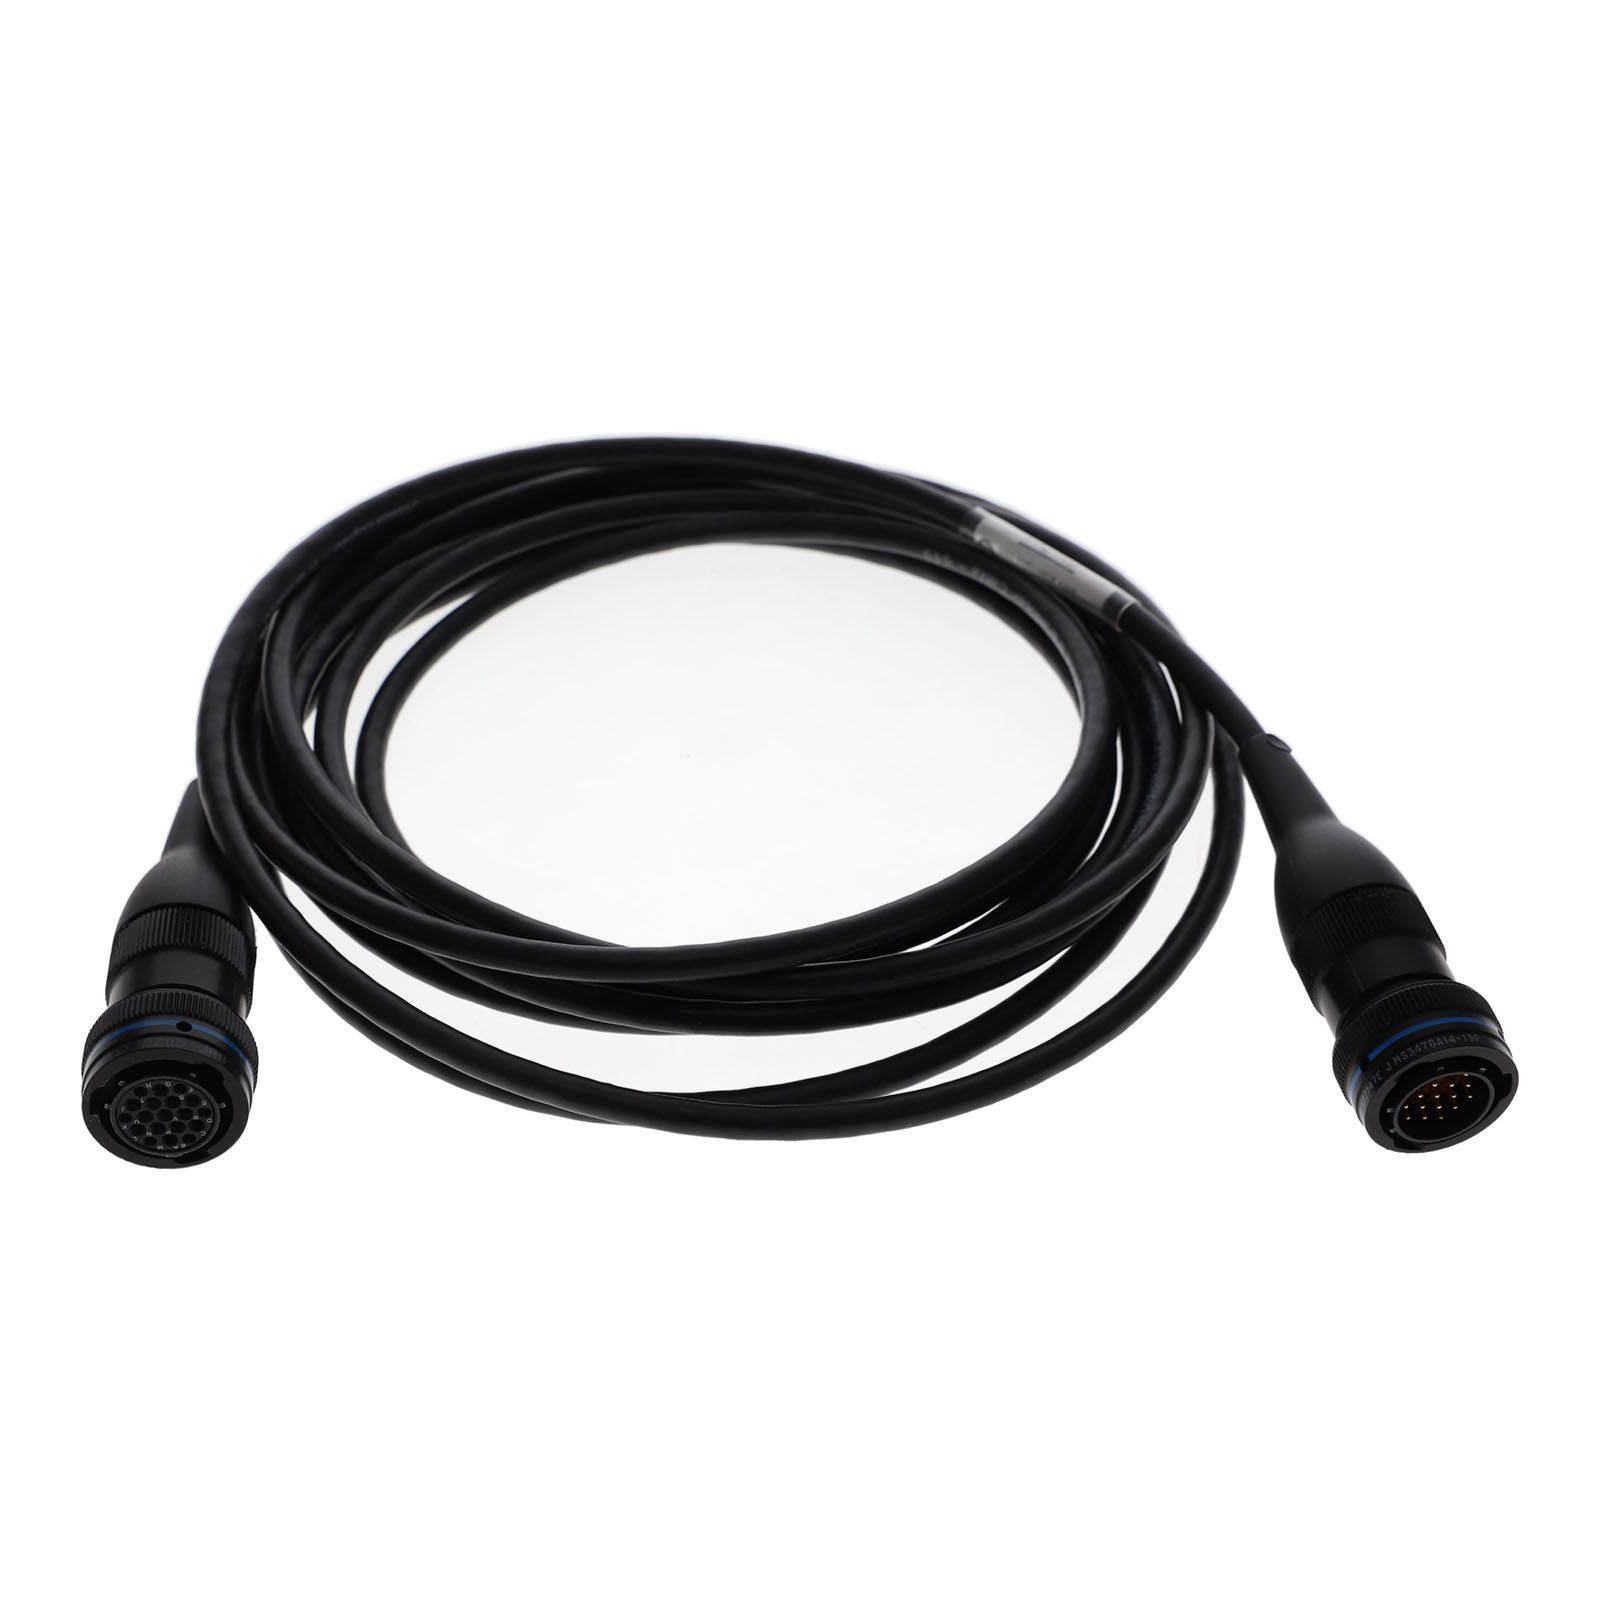 QAT ACCESSORY      _CABLE 5M  19-19 product photo